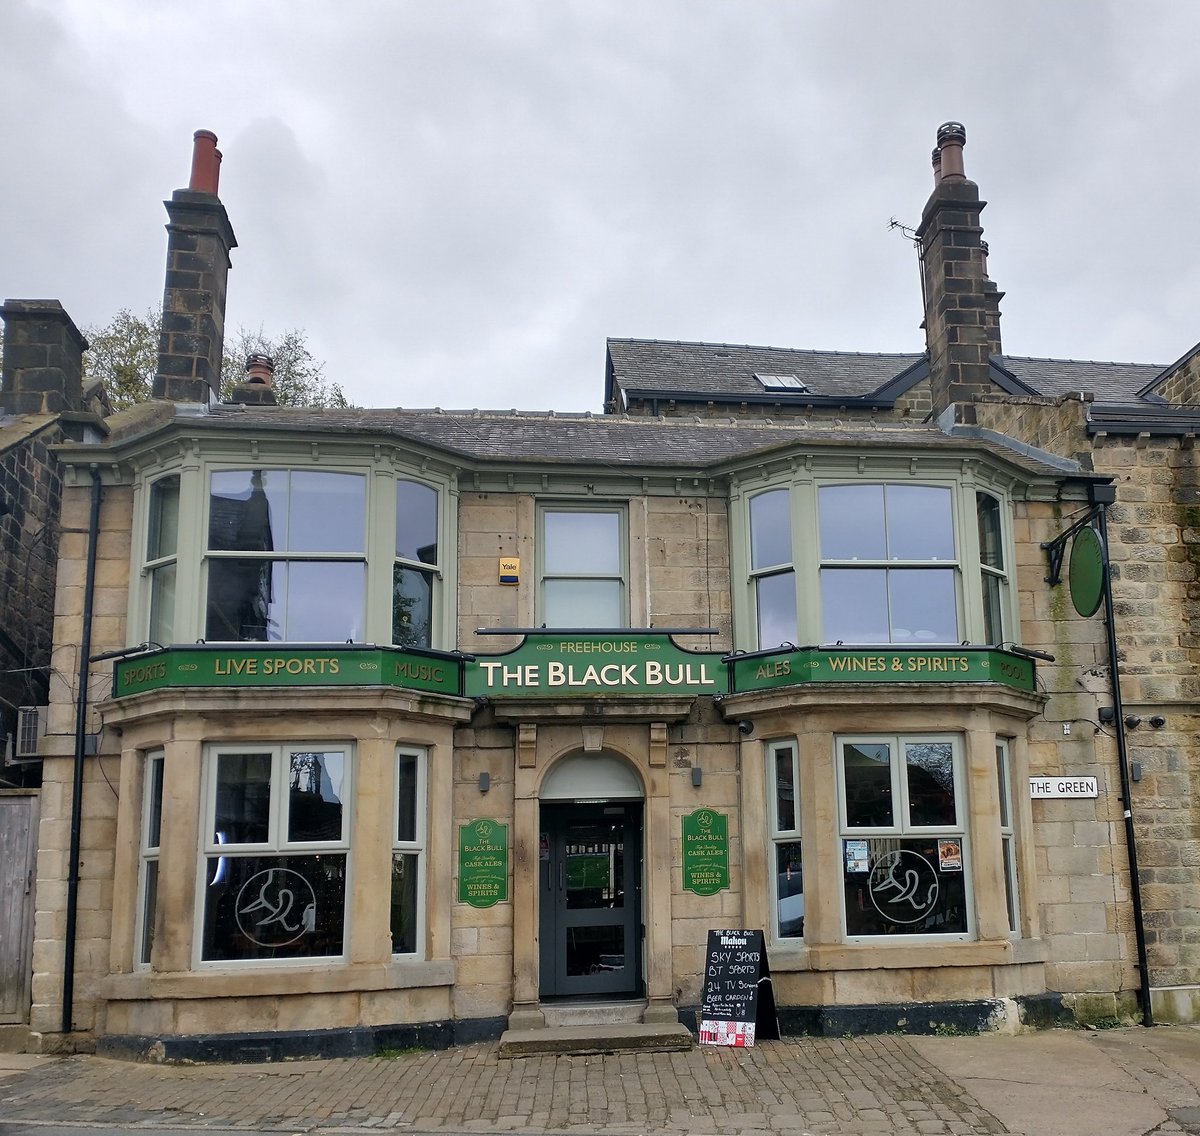 The Black Bull pub at Horsforth, Leeds was known to exist in 1834. In 1654 Walter Stanhope whose father was part owner of Kirkstall Abbey built a cottage here.
By 1758 John Lapish opened a brewhouse here which eventually became a public house. /1